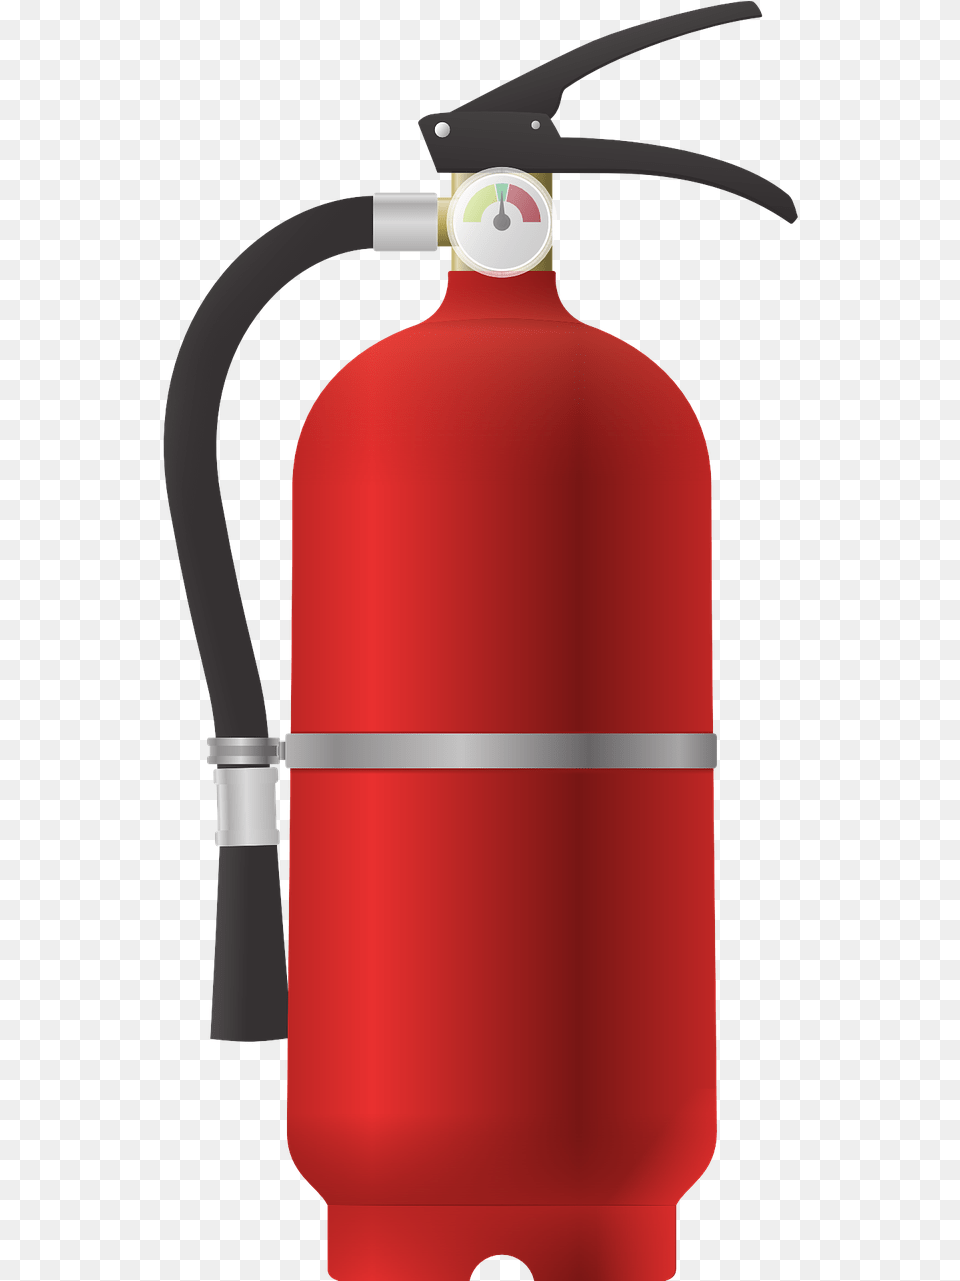 Fire Extinguisher Truck Fire Extinguisher Clipart, Cylinder, Smoke Pipe Png